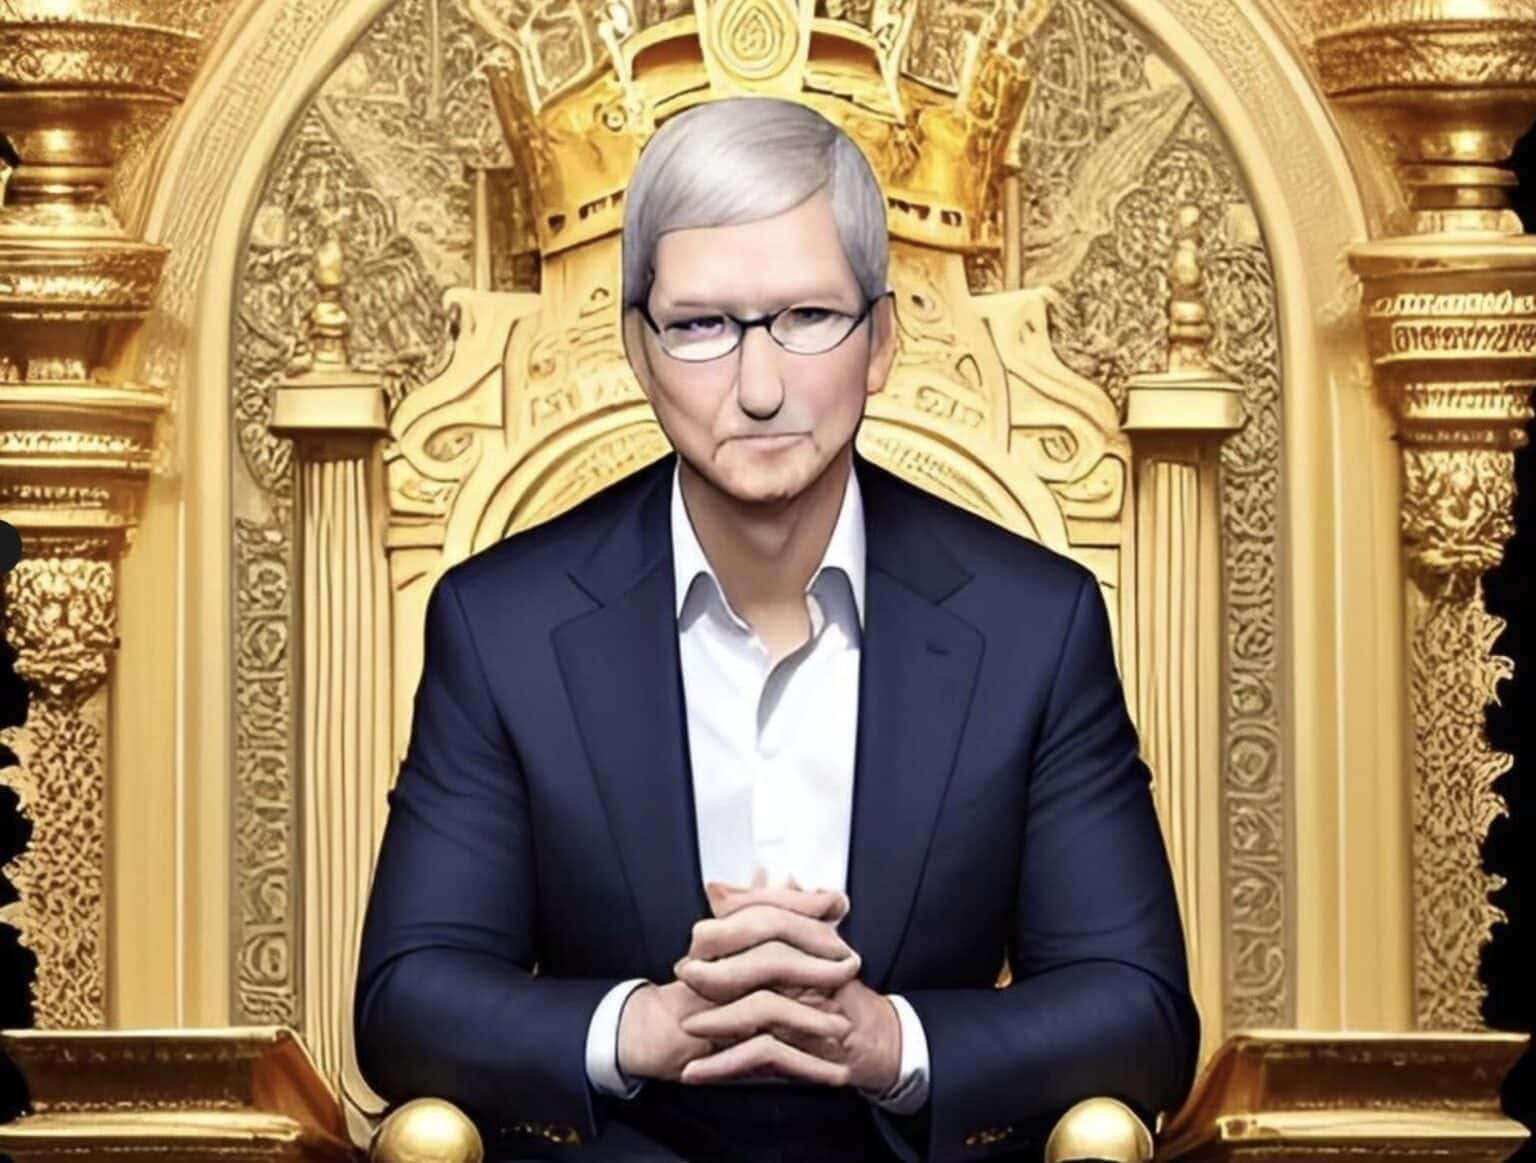 Tim Cook has plenty of money, so that couldn't be the reason.